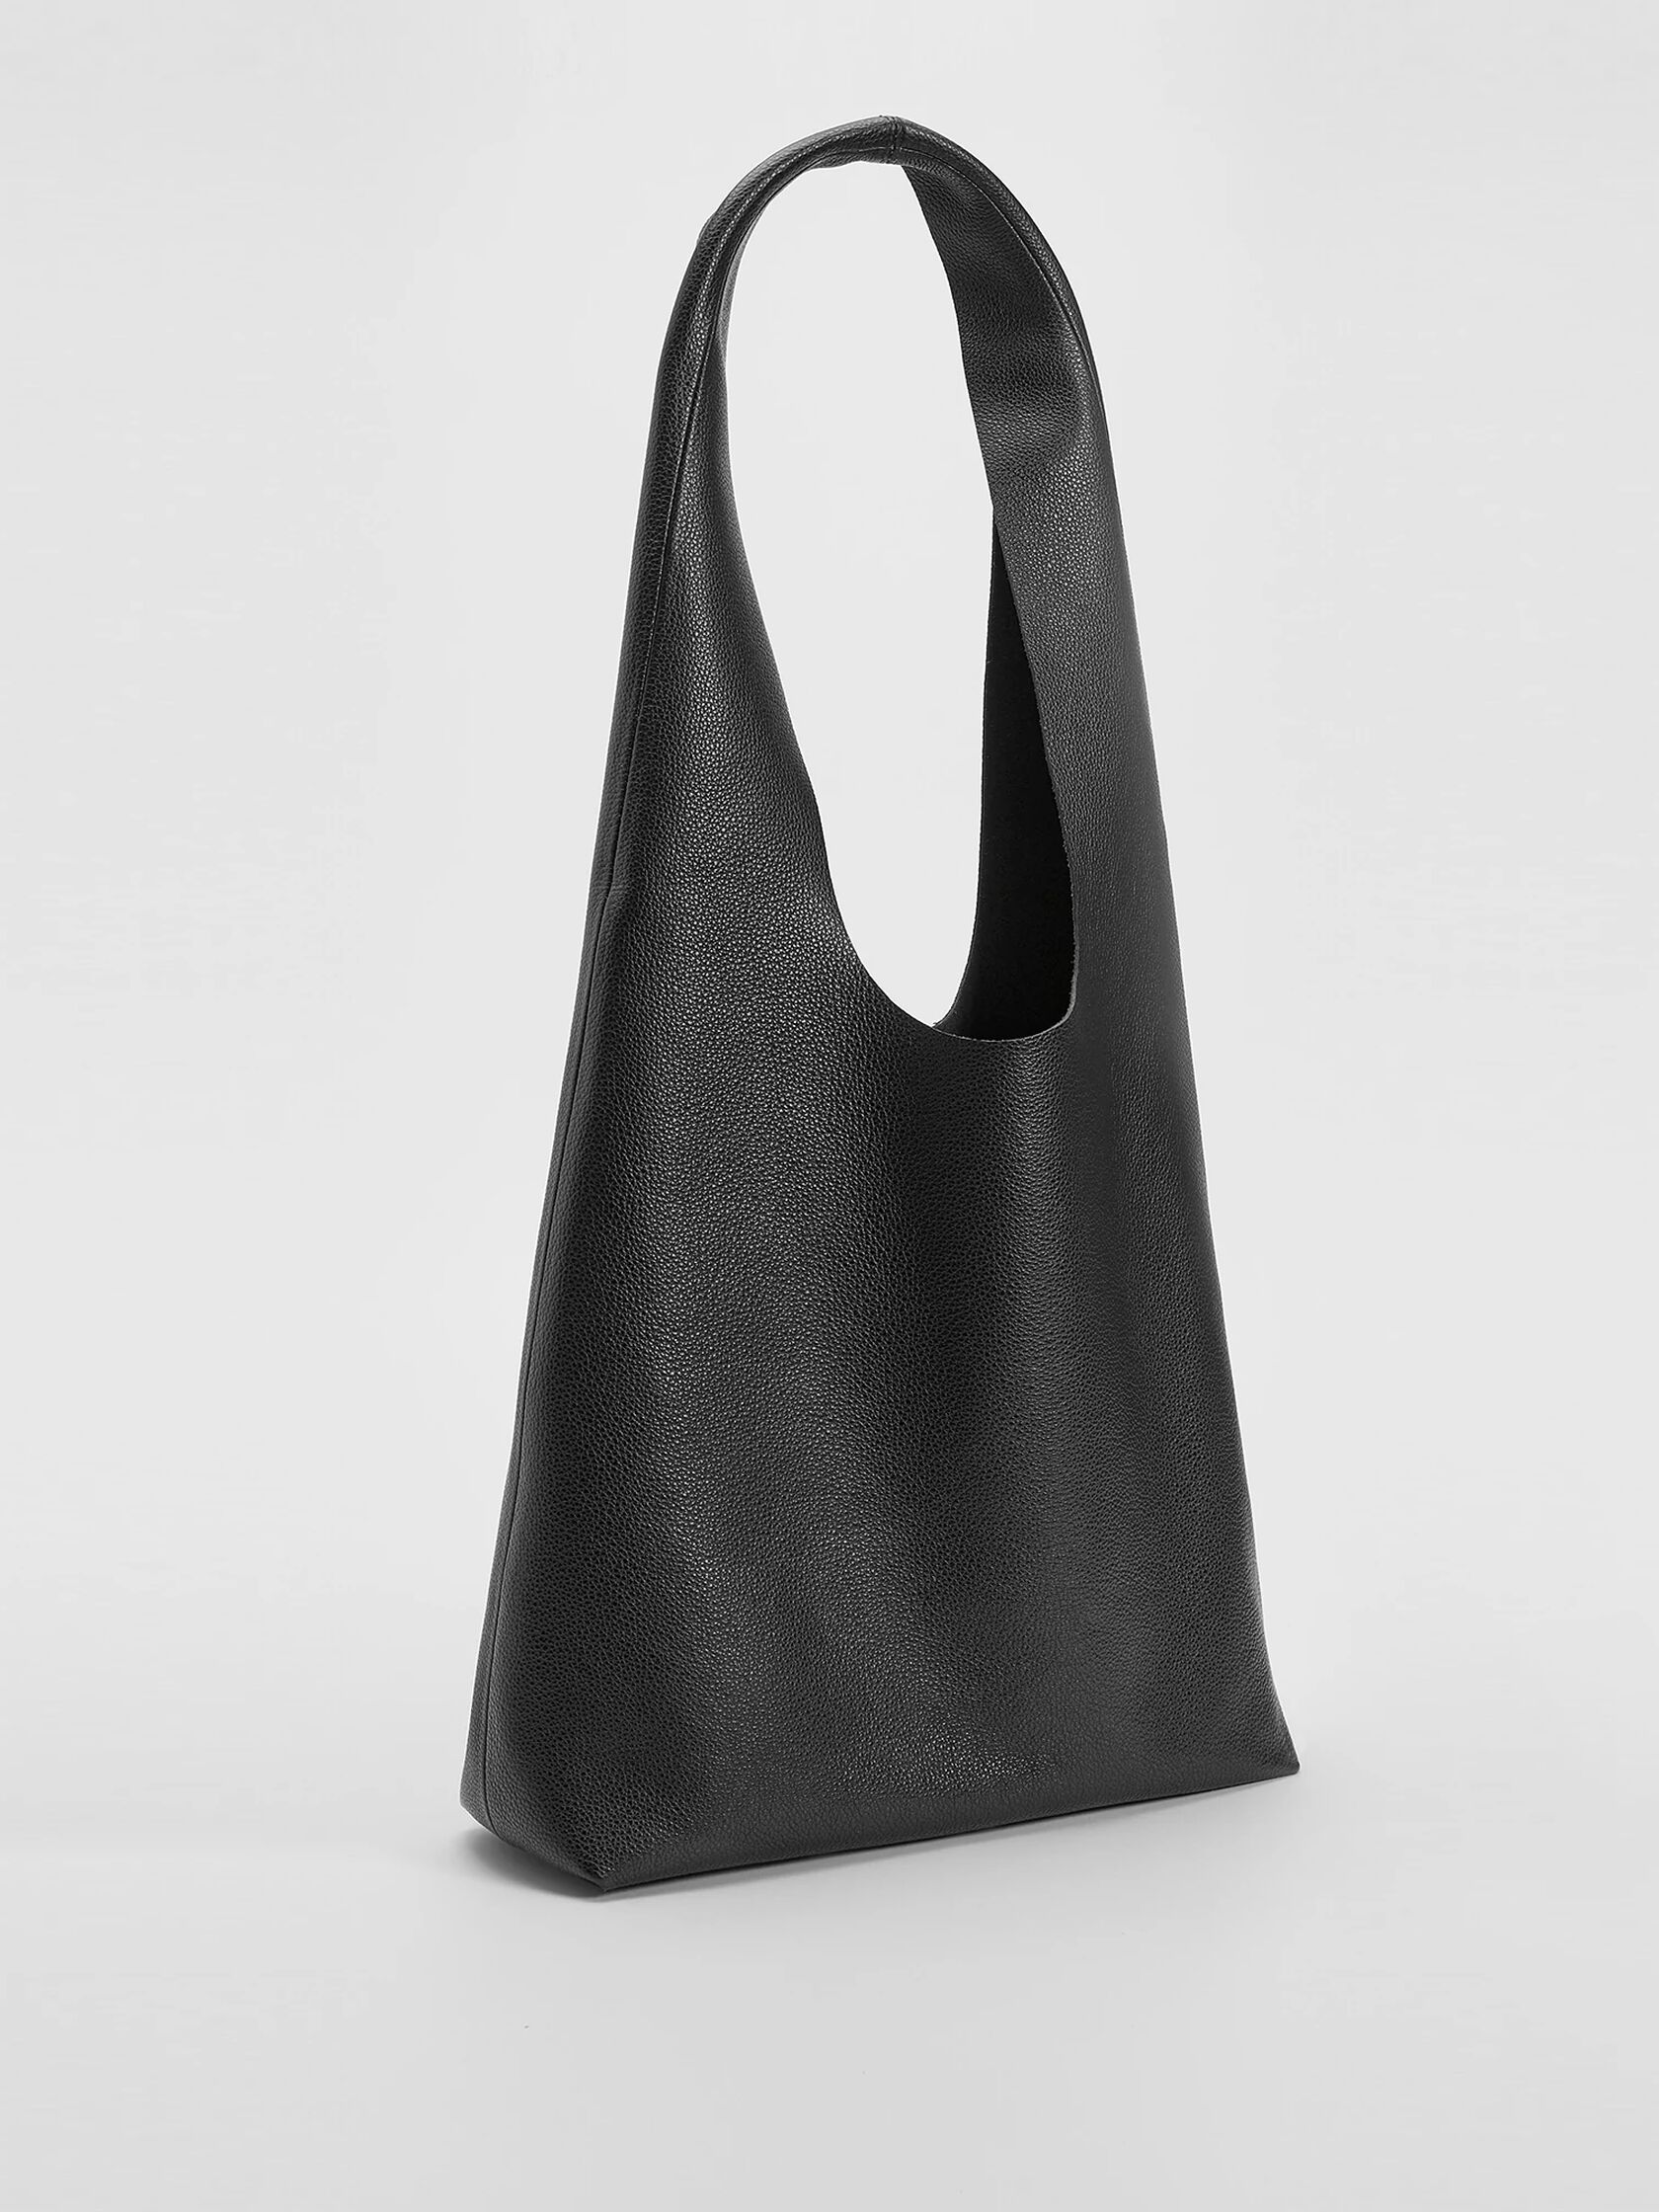 Textured Italian Leather Shopper Tote | EILEEN FISHER